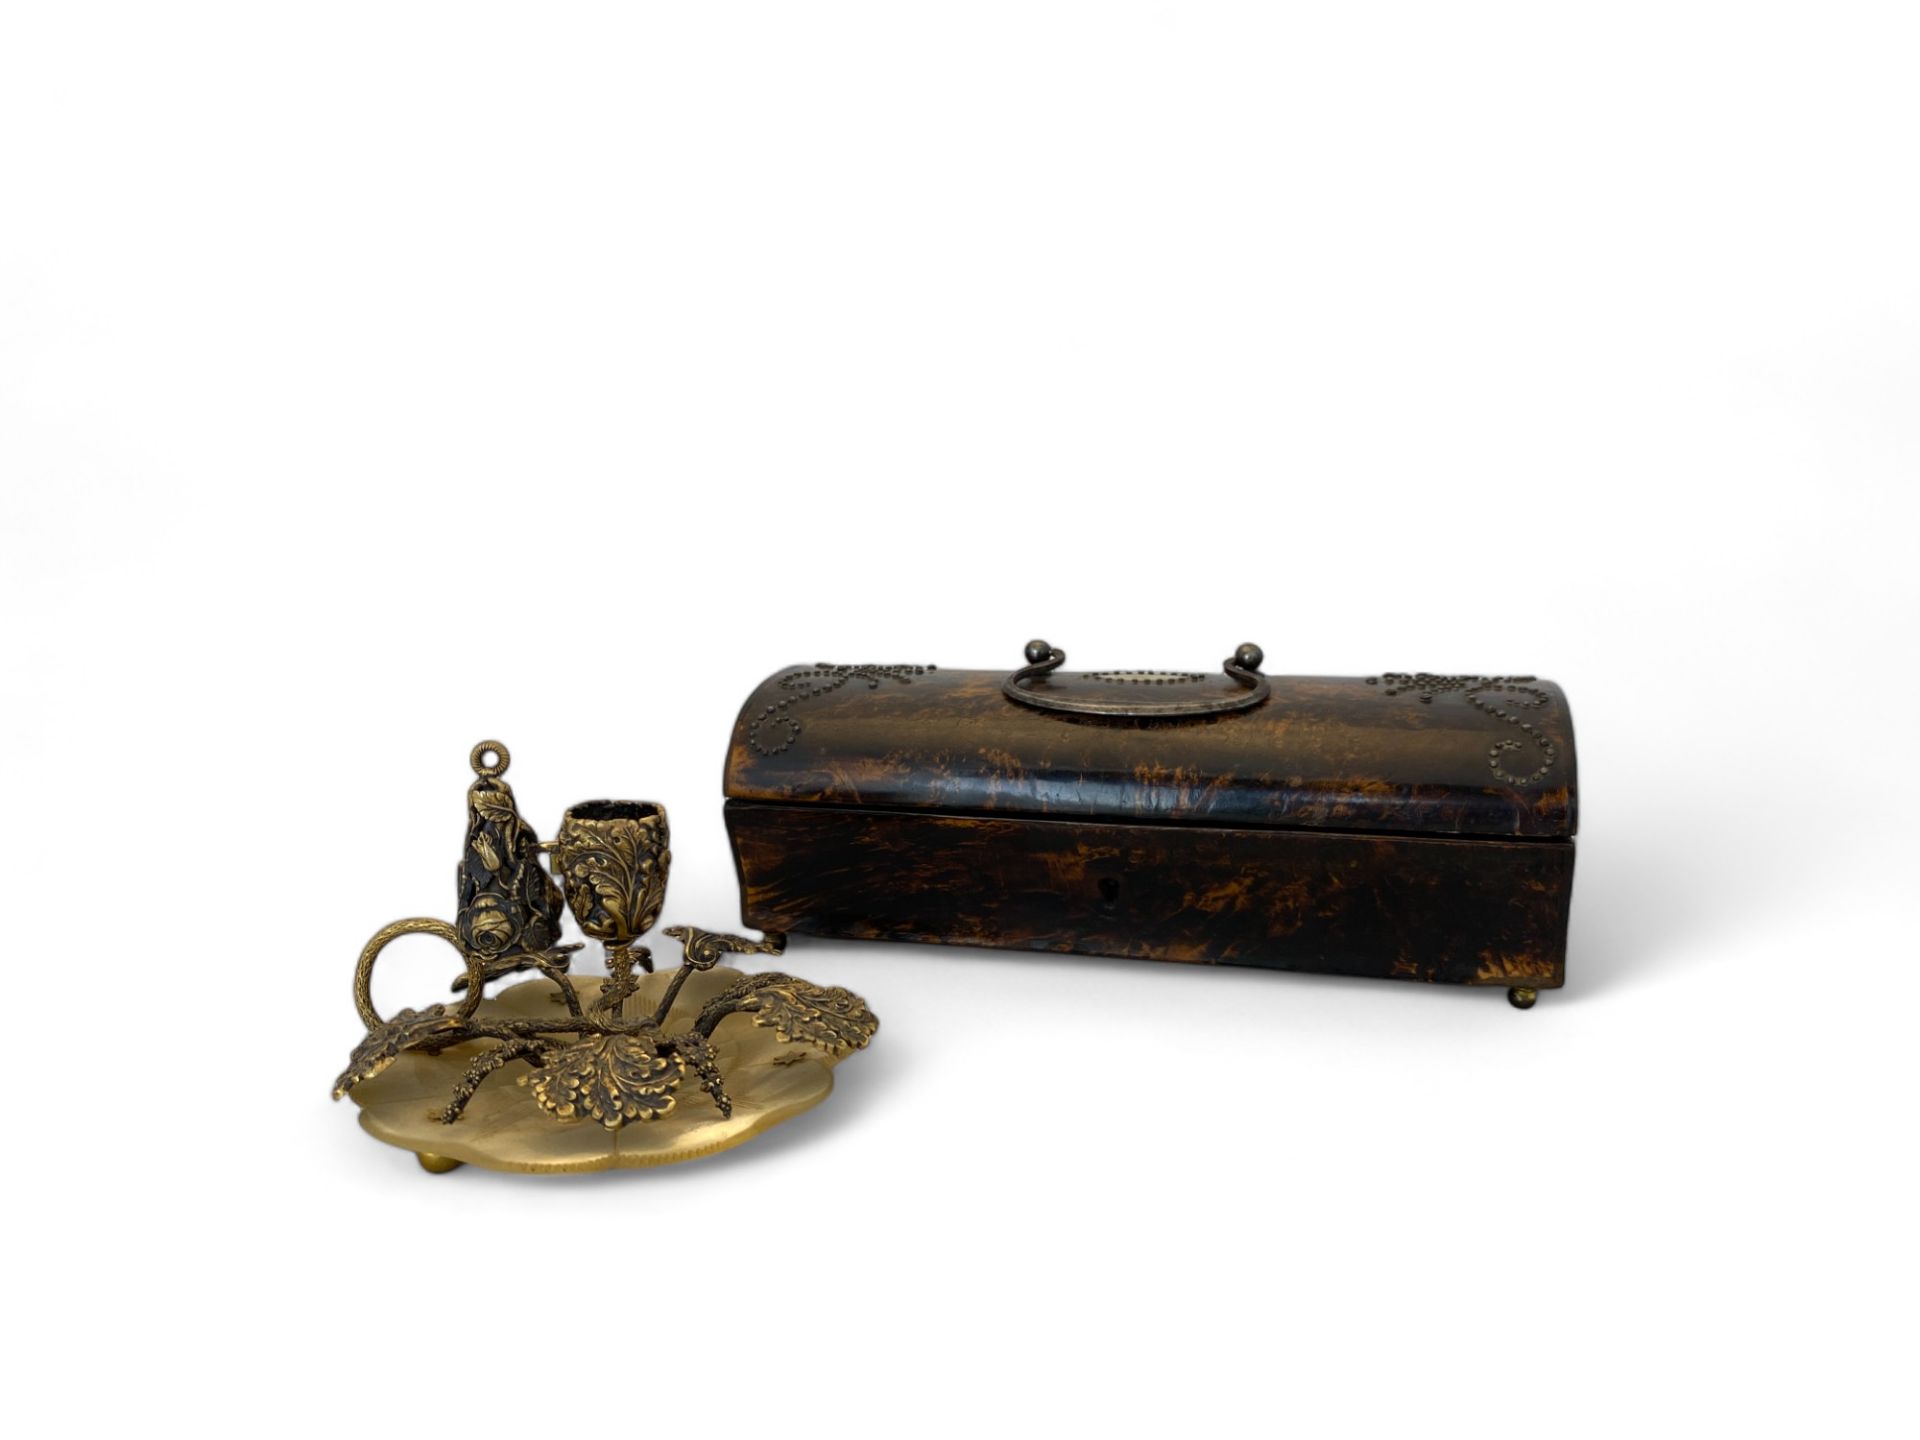 A mid 19th century French small burr walnut and cut steel decorated casket by Irlande, Palais Royal